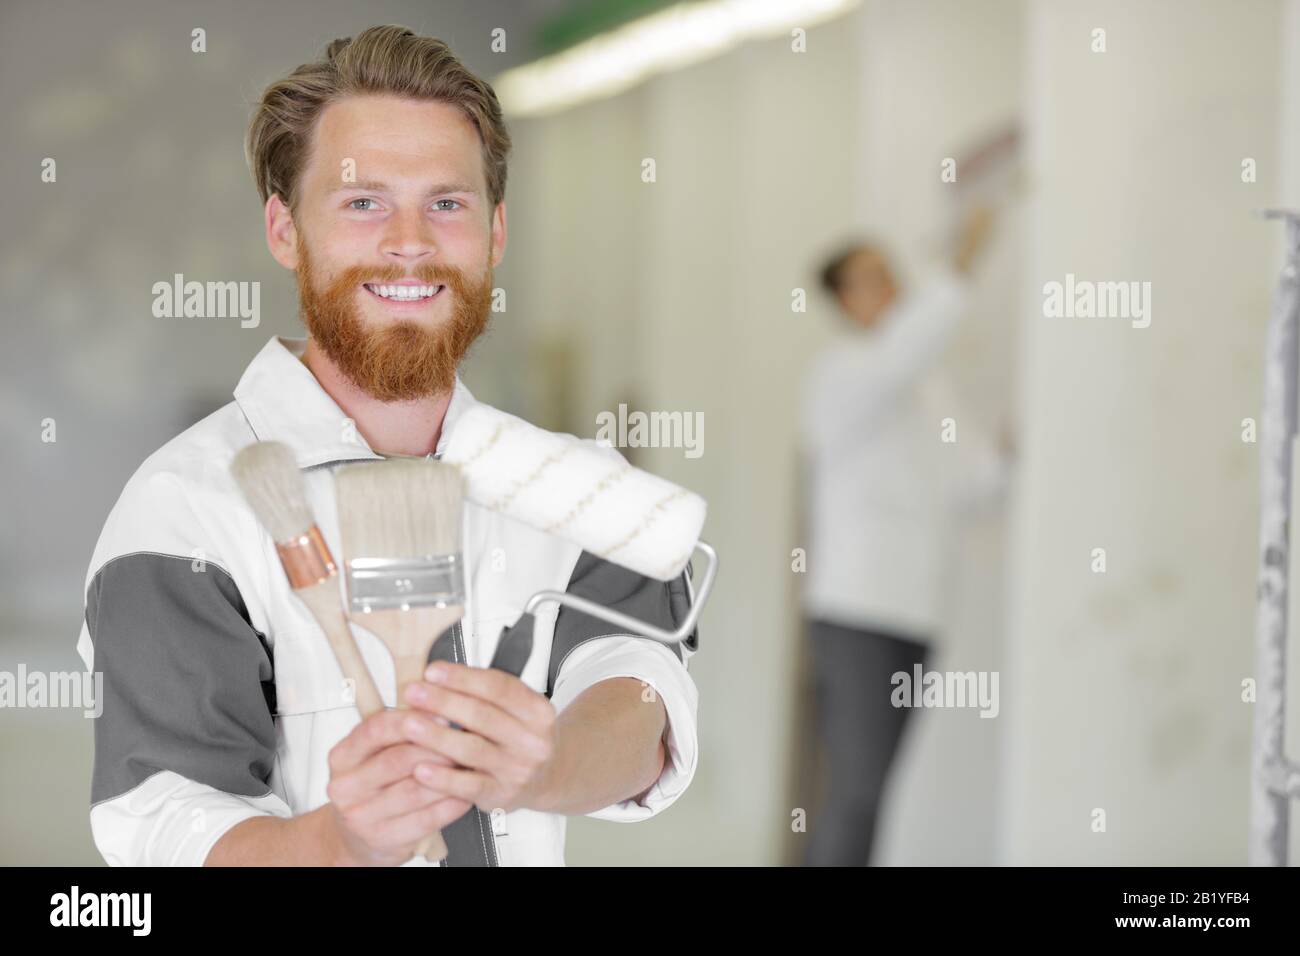 men with brush and roller smiling at camera Stock Photo